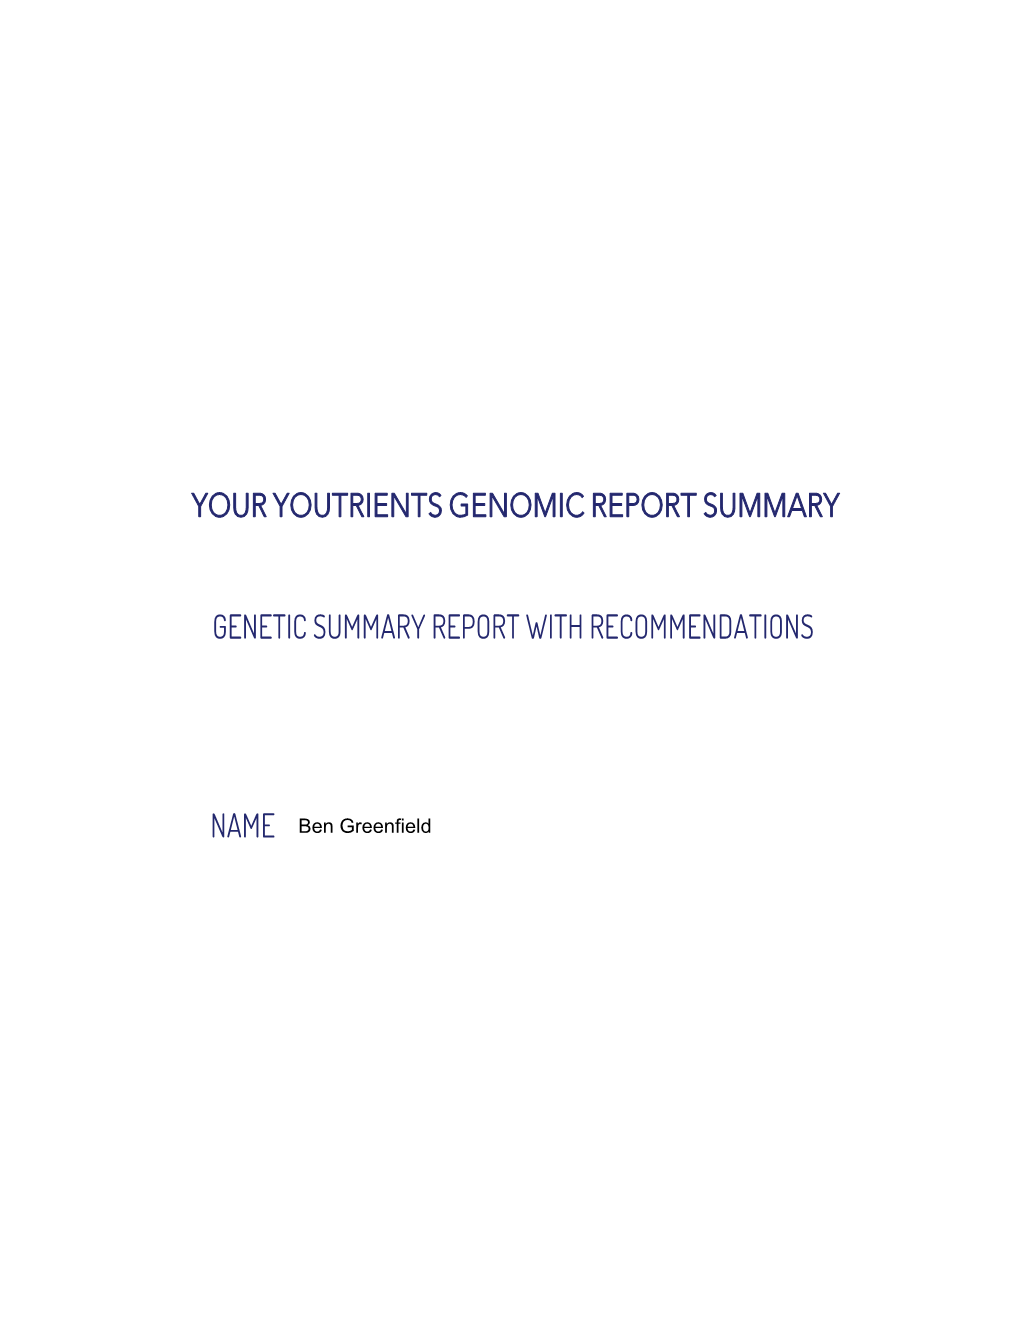 Your Youtrients Genomic Report Summary